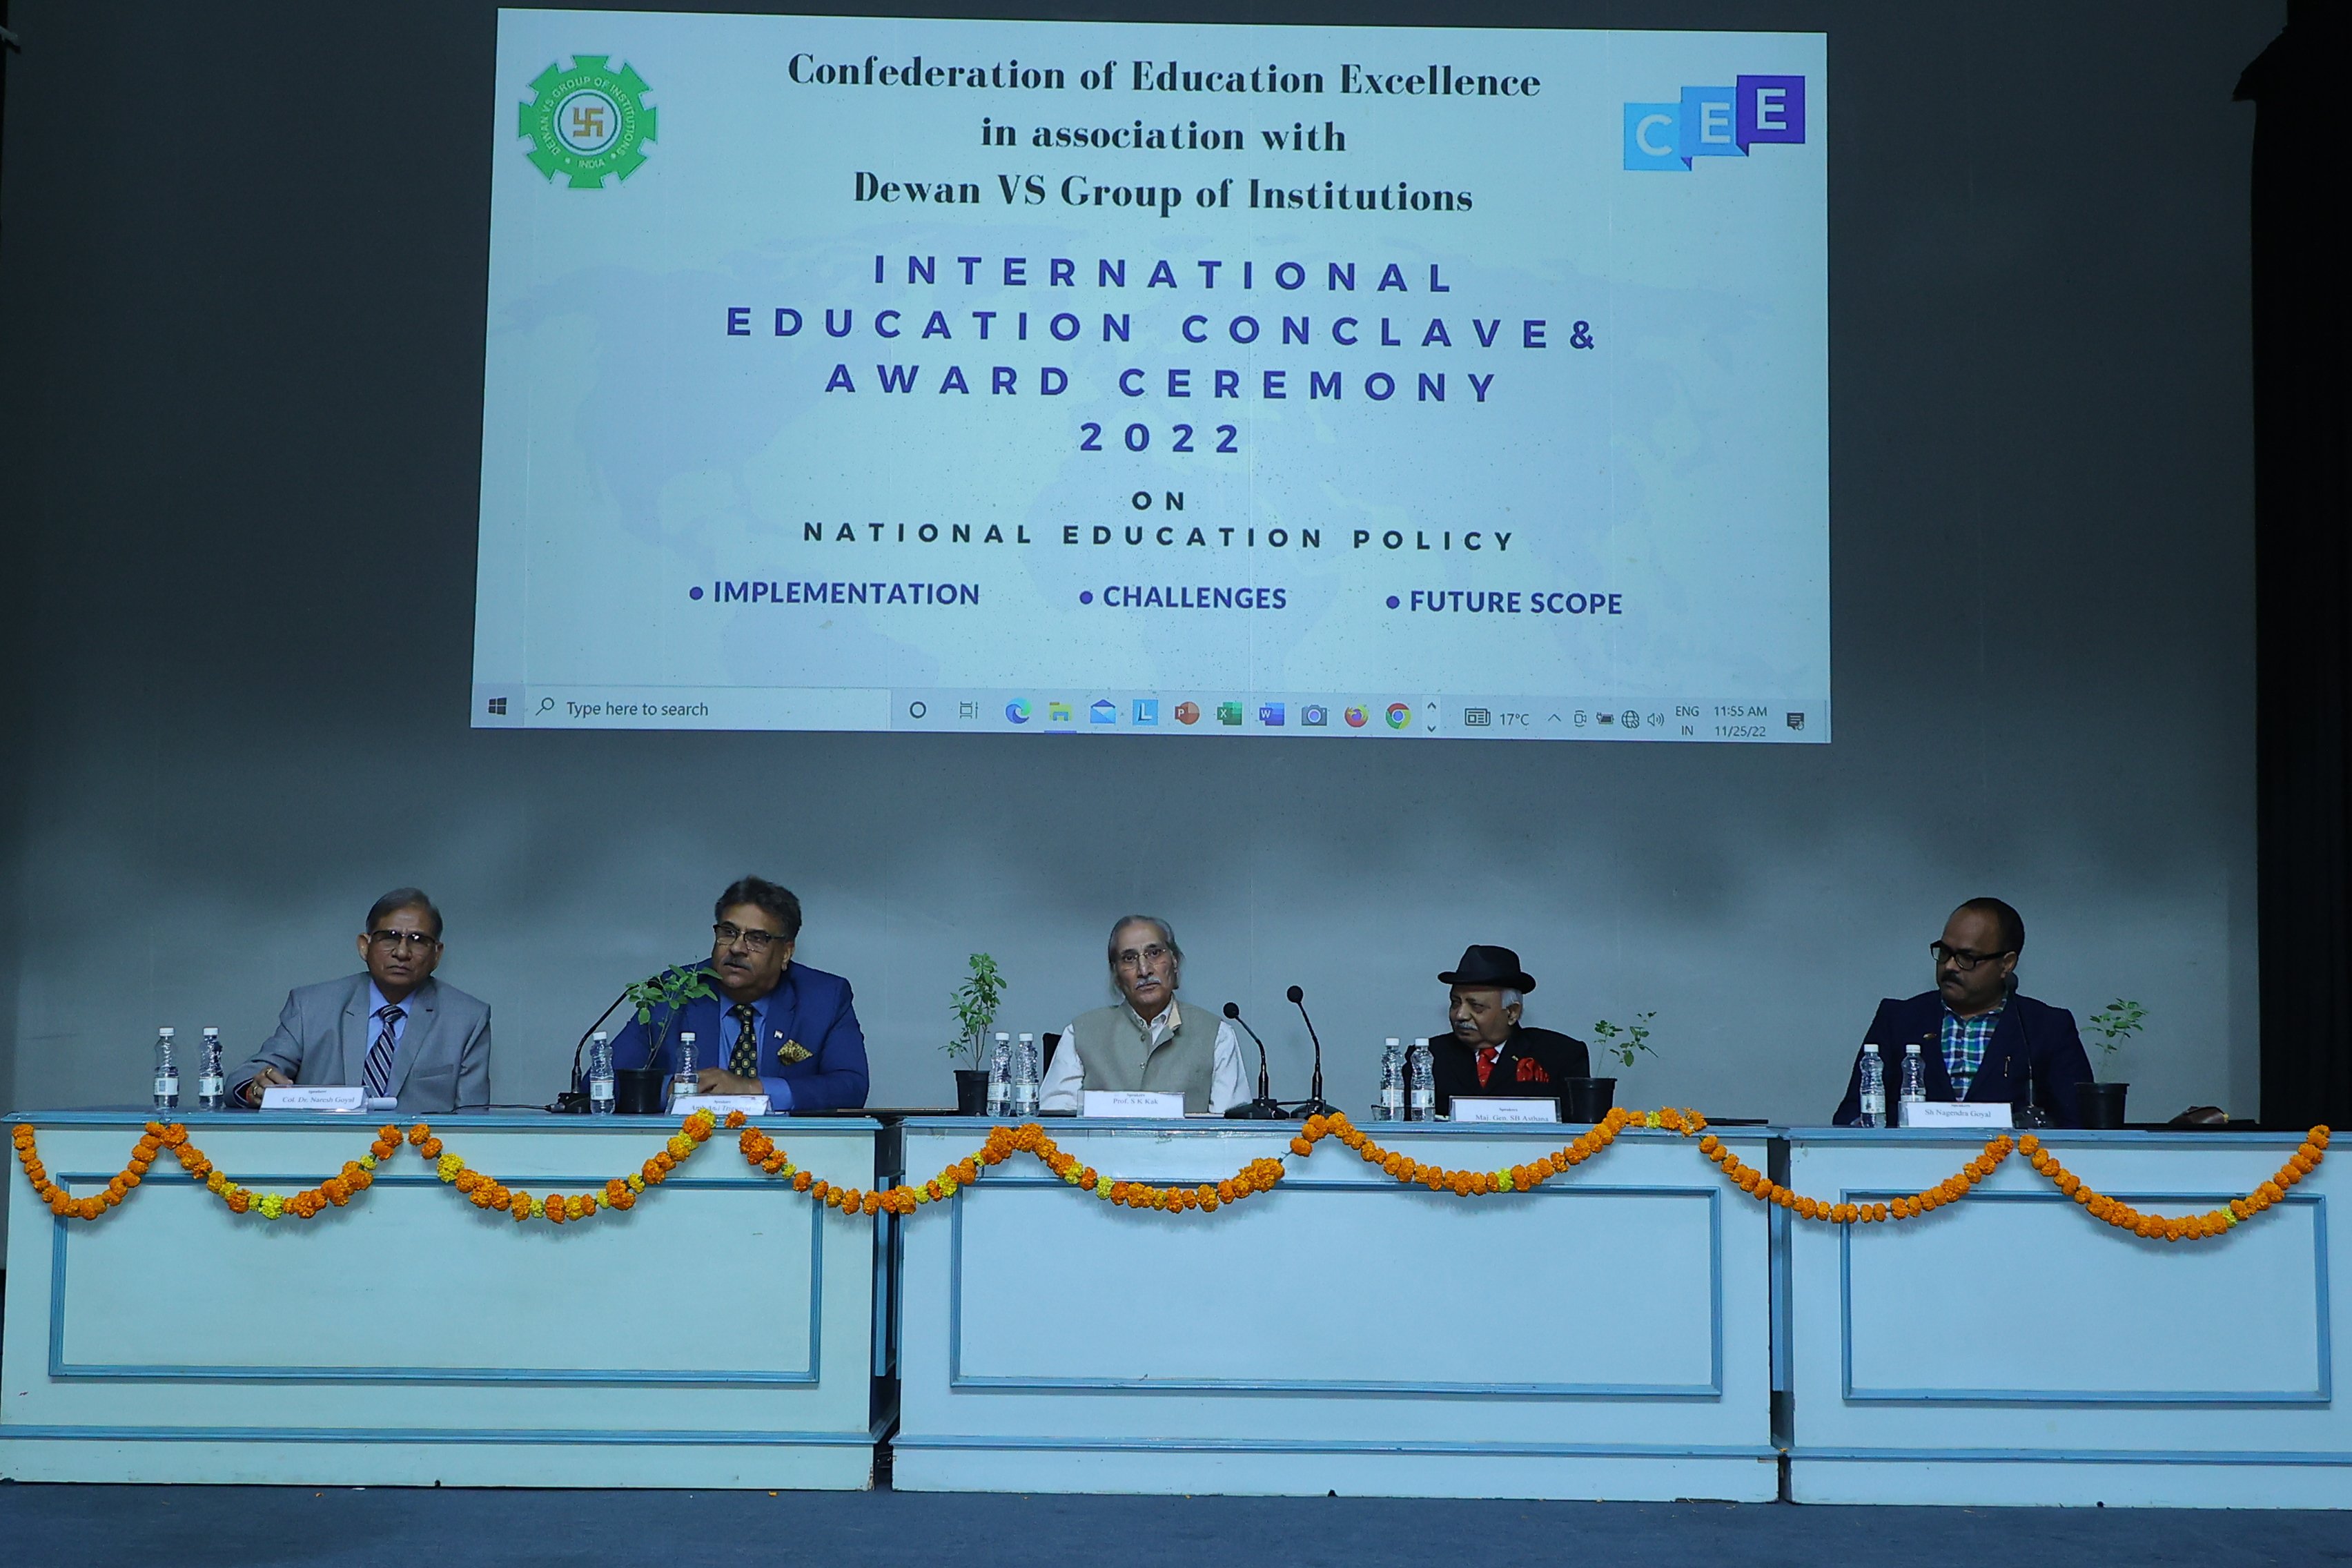 Dewan VS Group of Institutions Organized an International Education Conclave and Award Ceremony